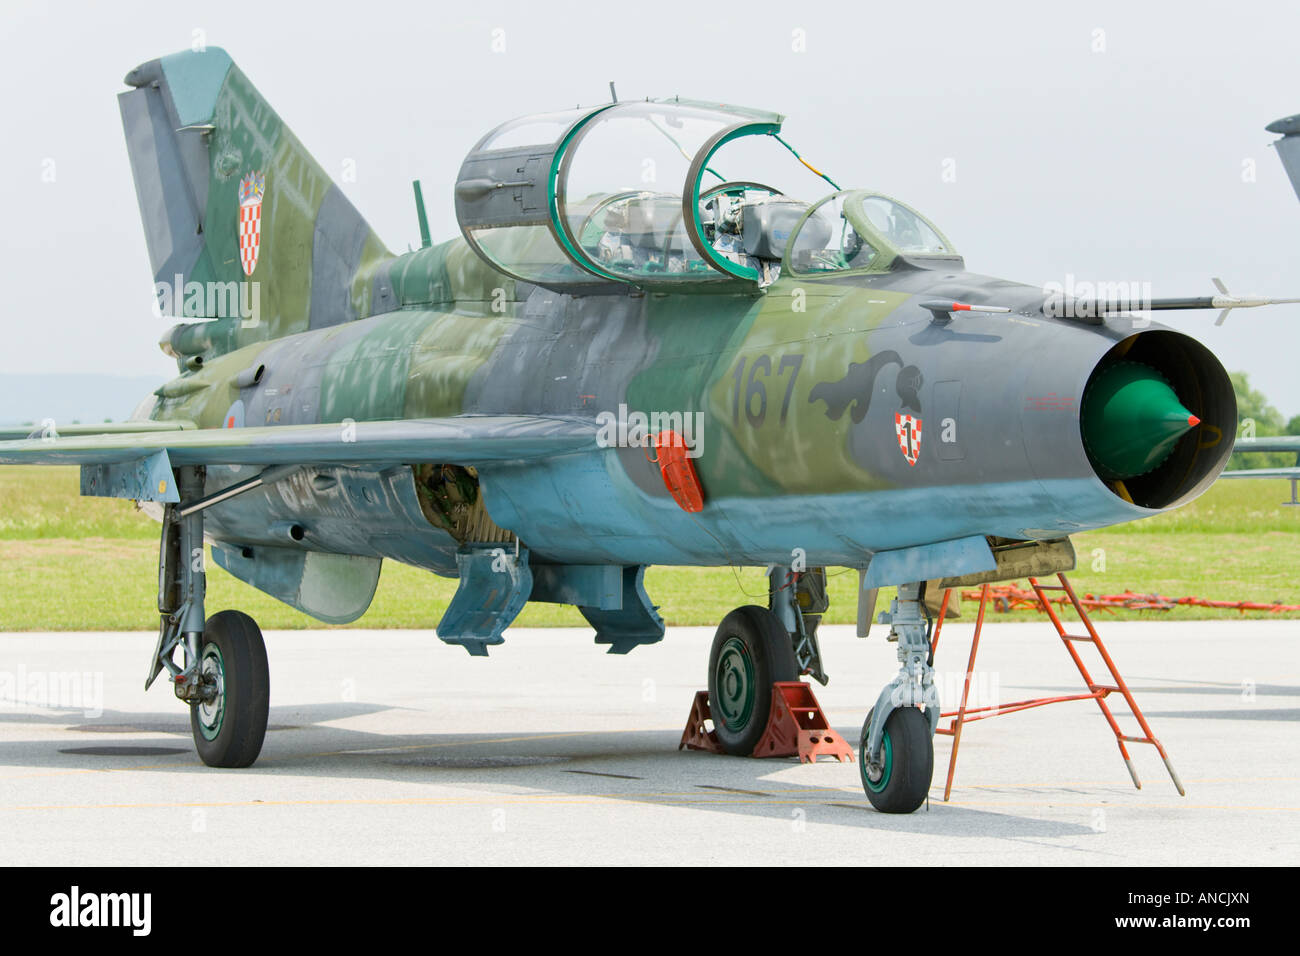 Croatian Air Force MiG-21 UMD two seater trainer, Pleso AFB during 'open day' visit in 2007 Stock Photo